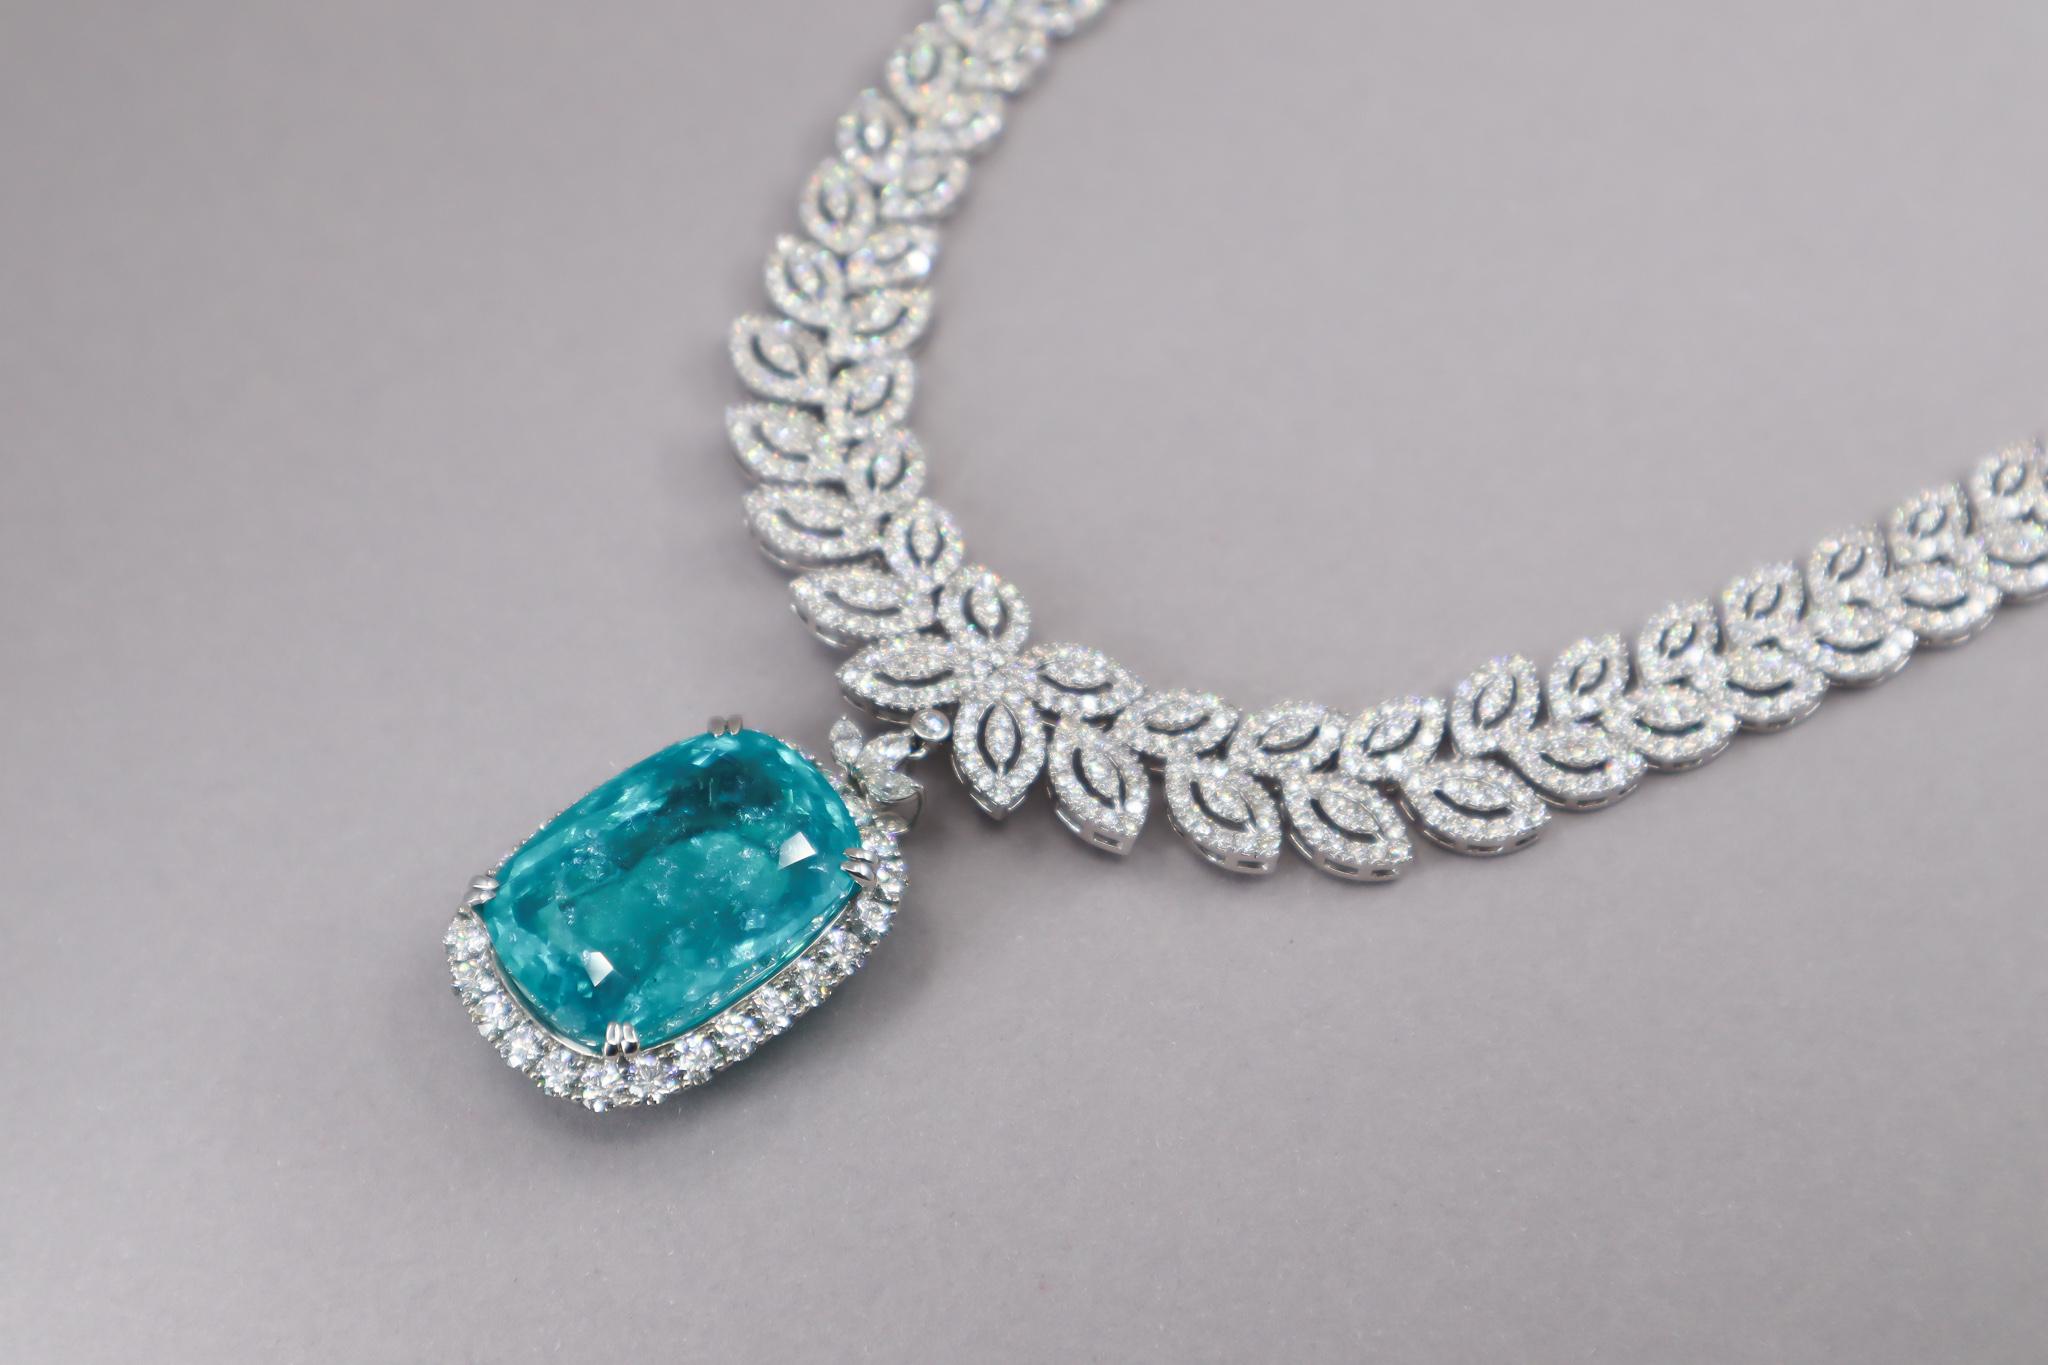 The sensational color, 88.37 carat Paraiba tourmaline Necklace from Mozambique with GRS report certification. 
This Paraiba tourmaline is among the most sought-after and rare gemstones in the world and Paraiba Tourmalines of this size are virtually